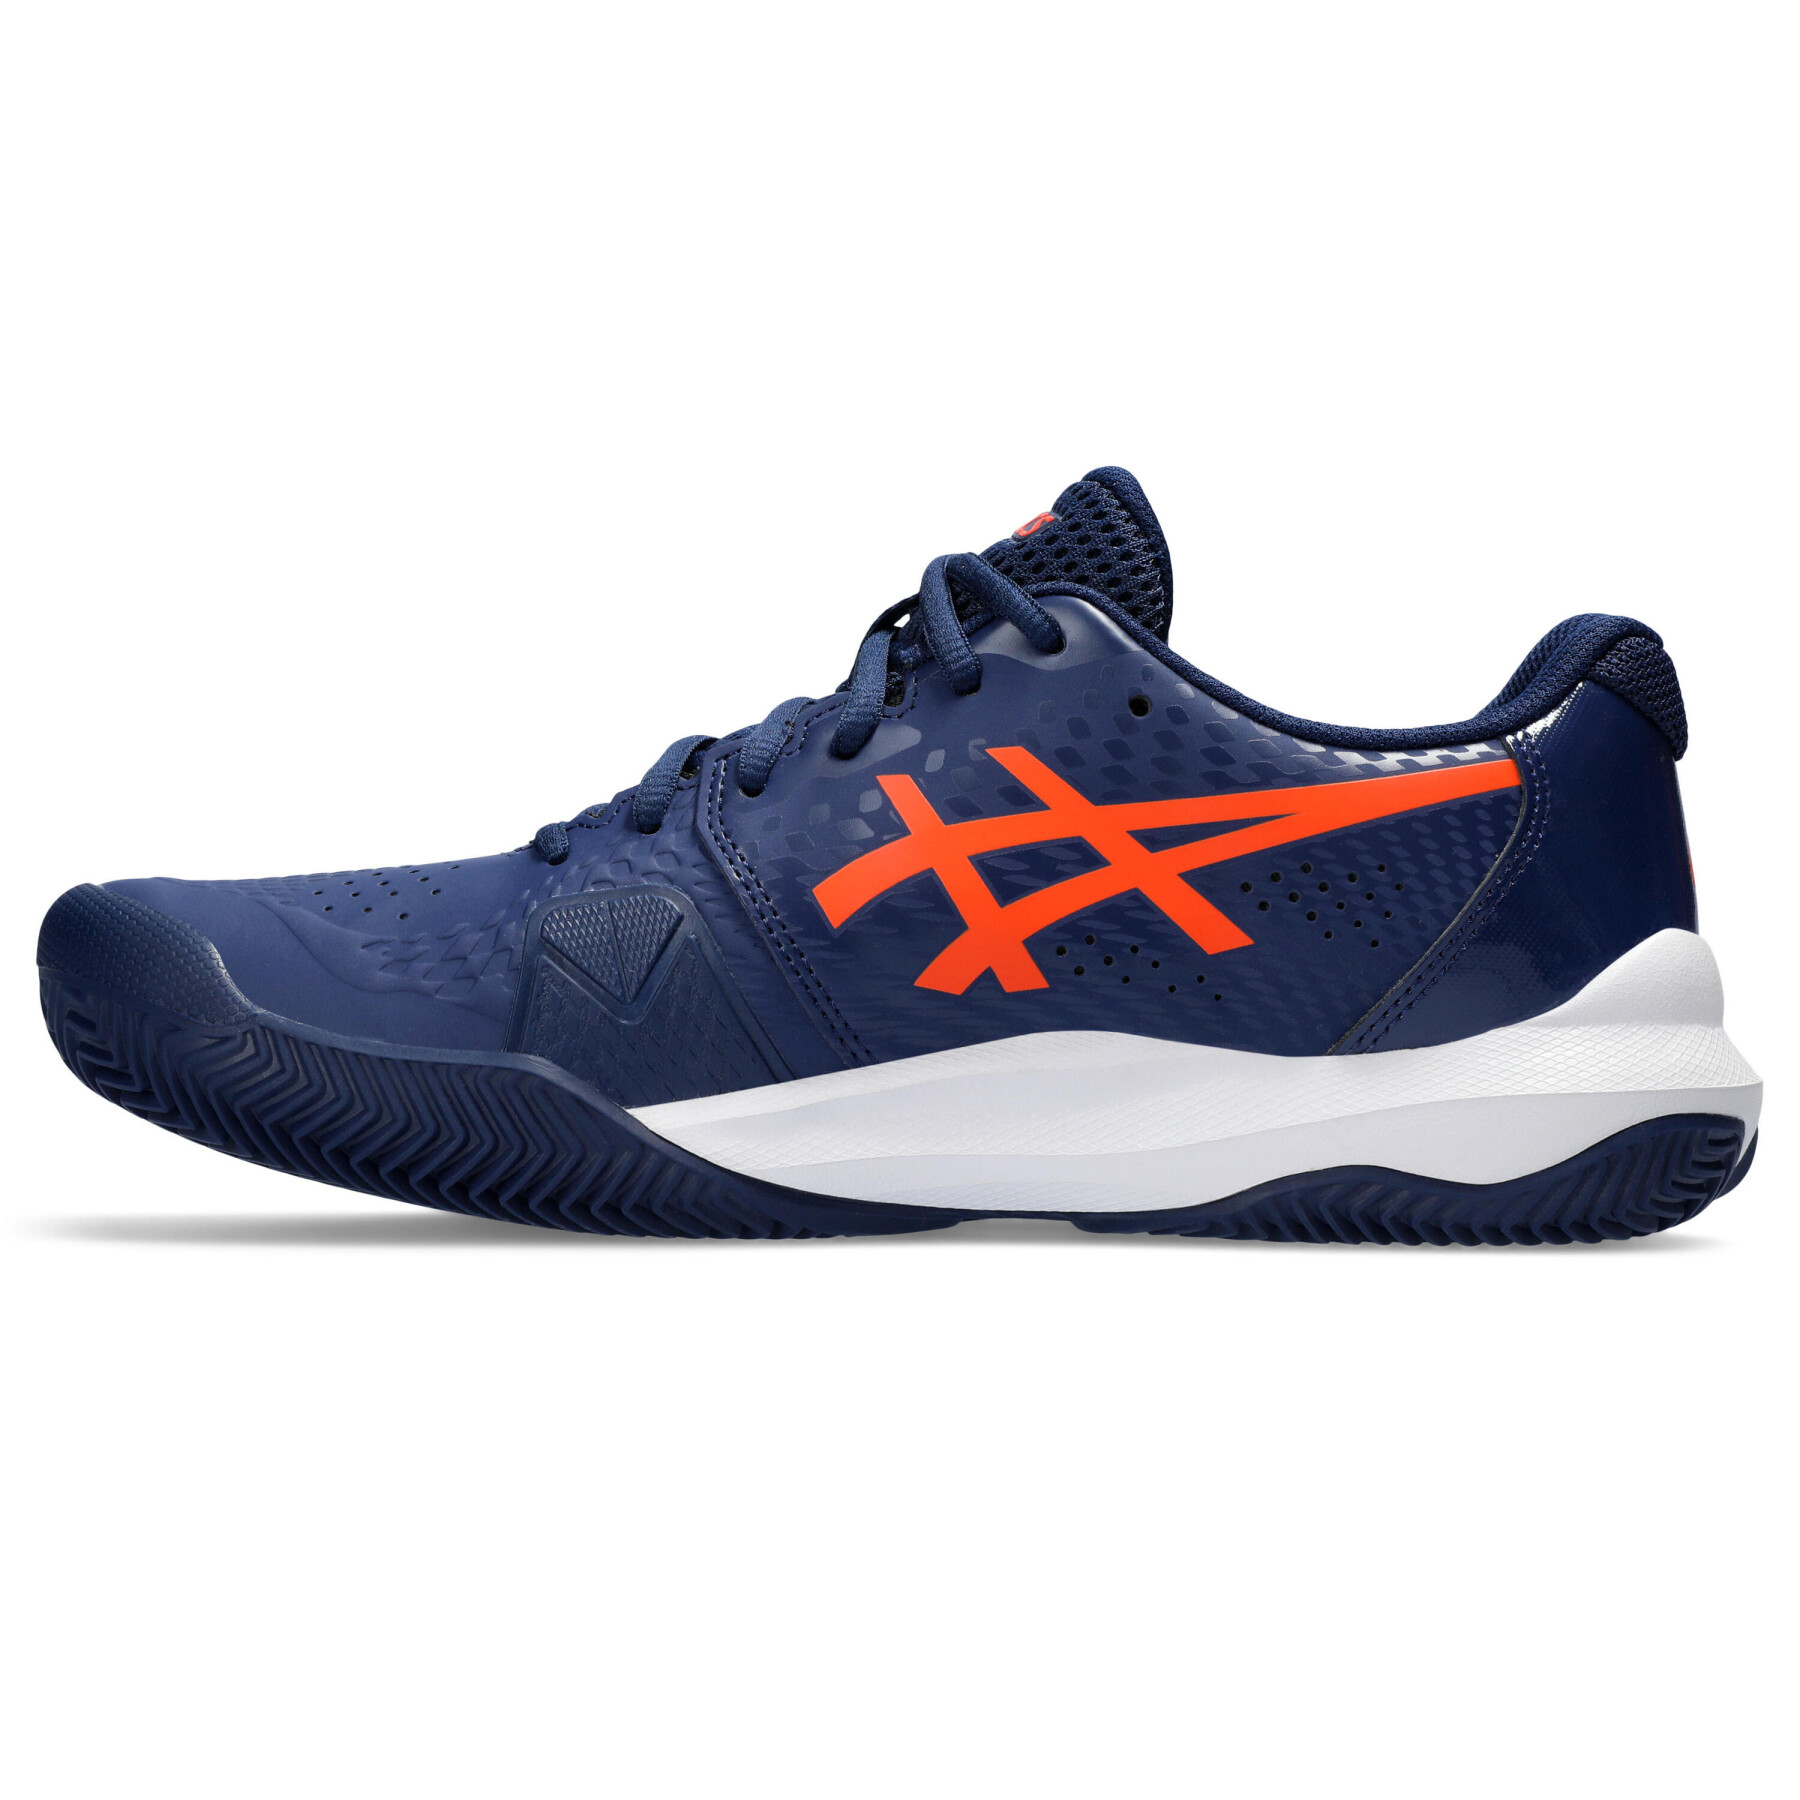 Tennis shoes Asics Gel-Challenger 14 Clay